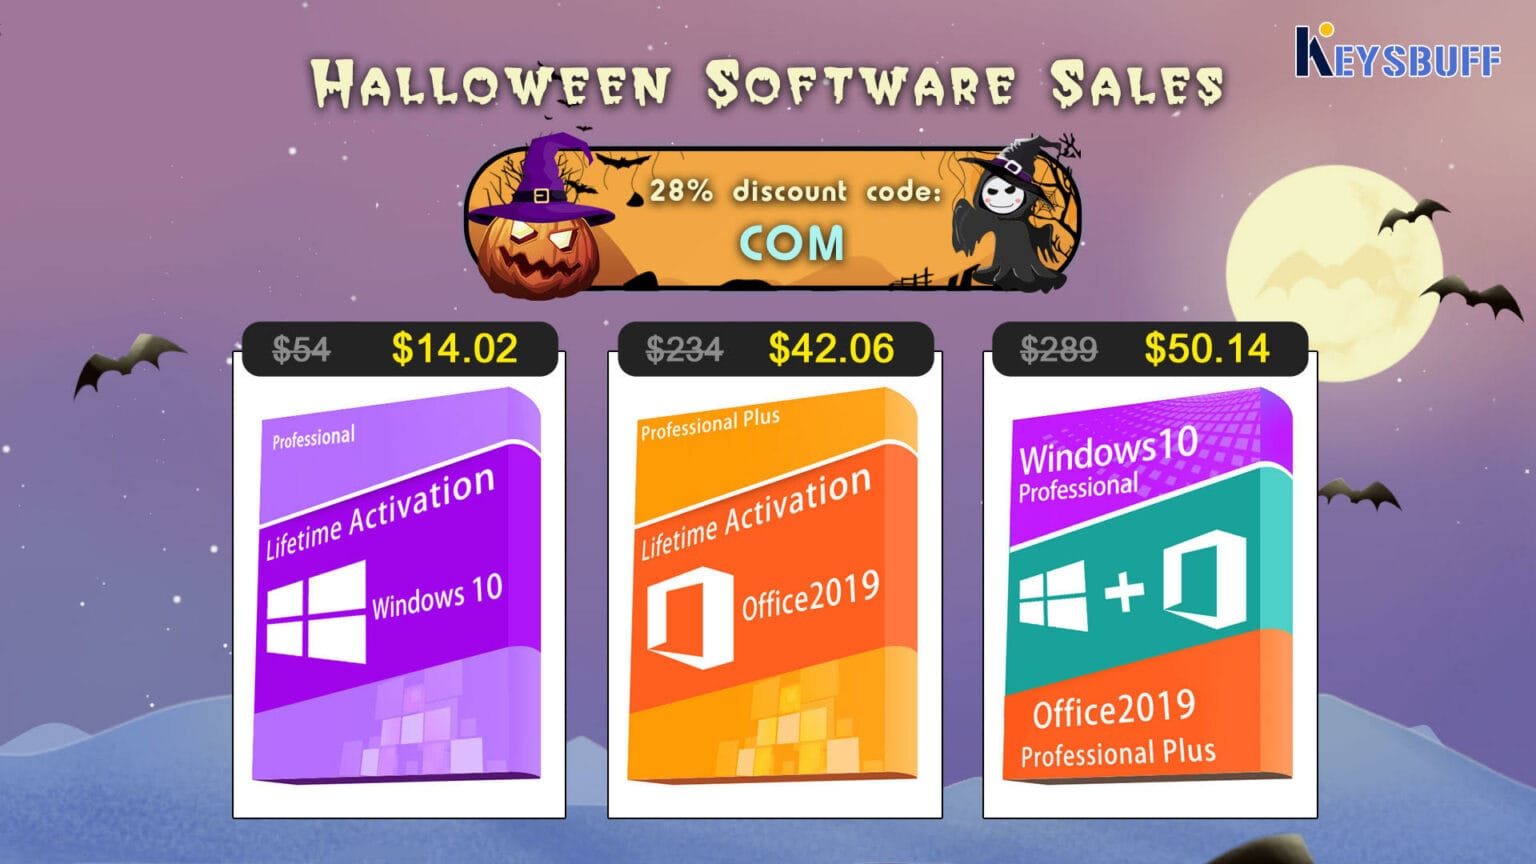 In Keysbuff's Halloween Sale, you can get genuine lifetime activation of Windows 10 and more.